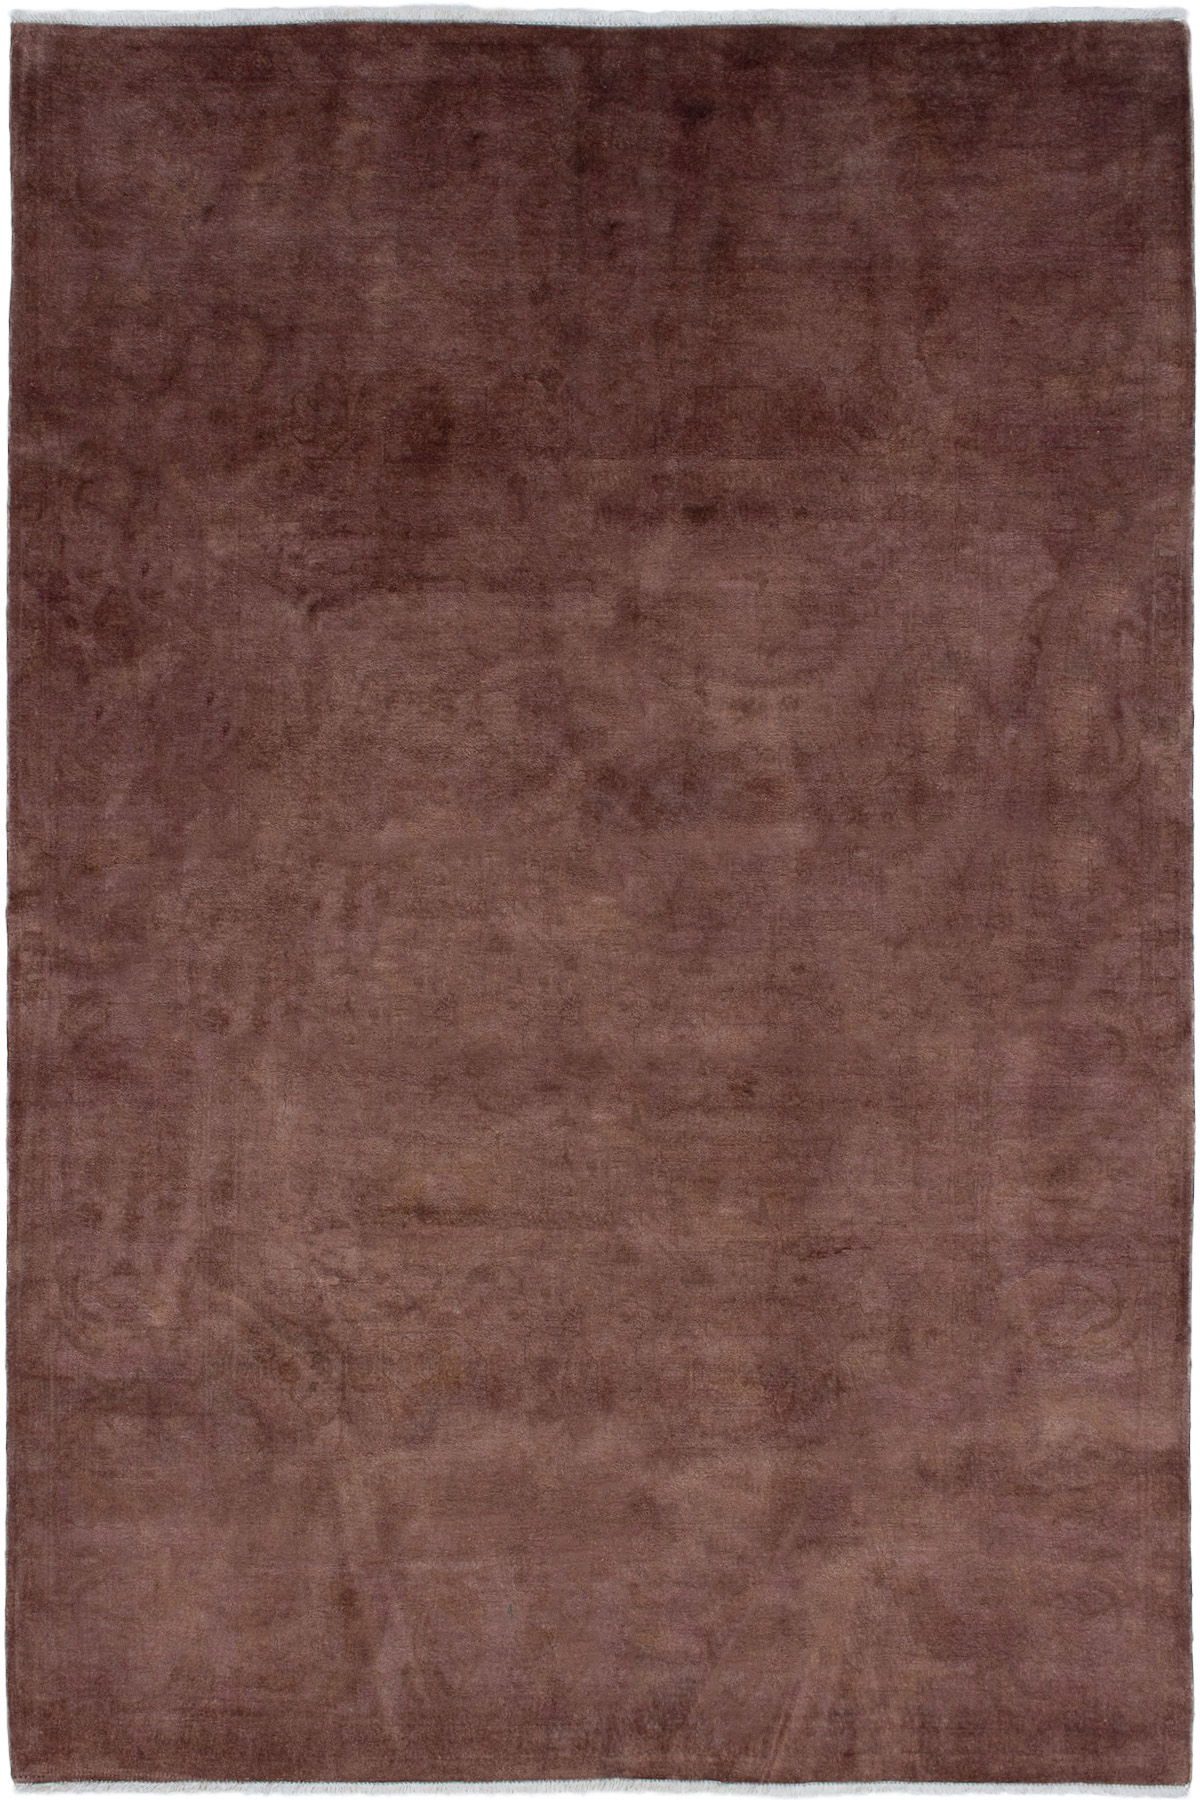 Hand-knotted Color transition Brown Wool Rug 6'0" x 9'0" Size: 6'0" x 9'0"  